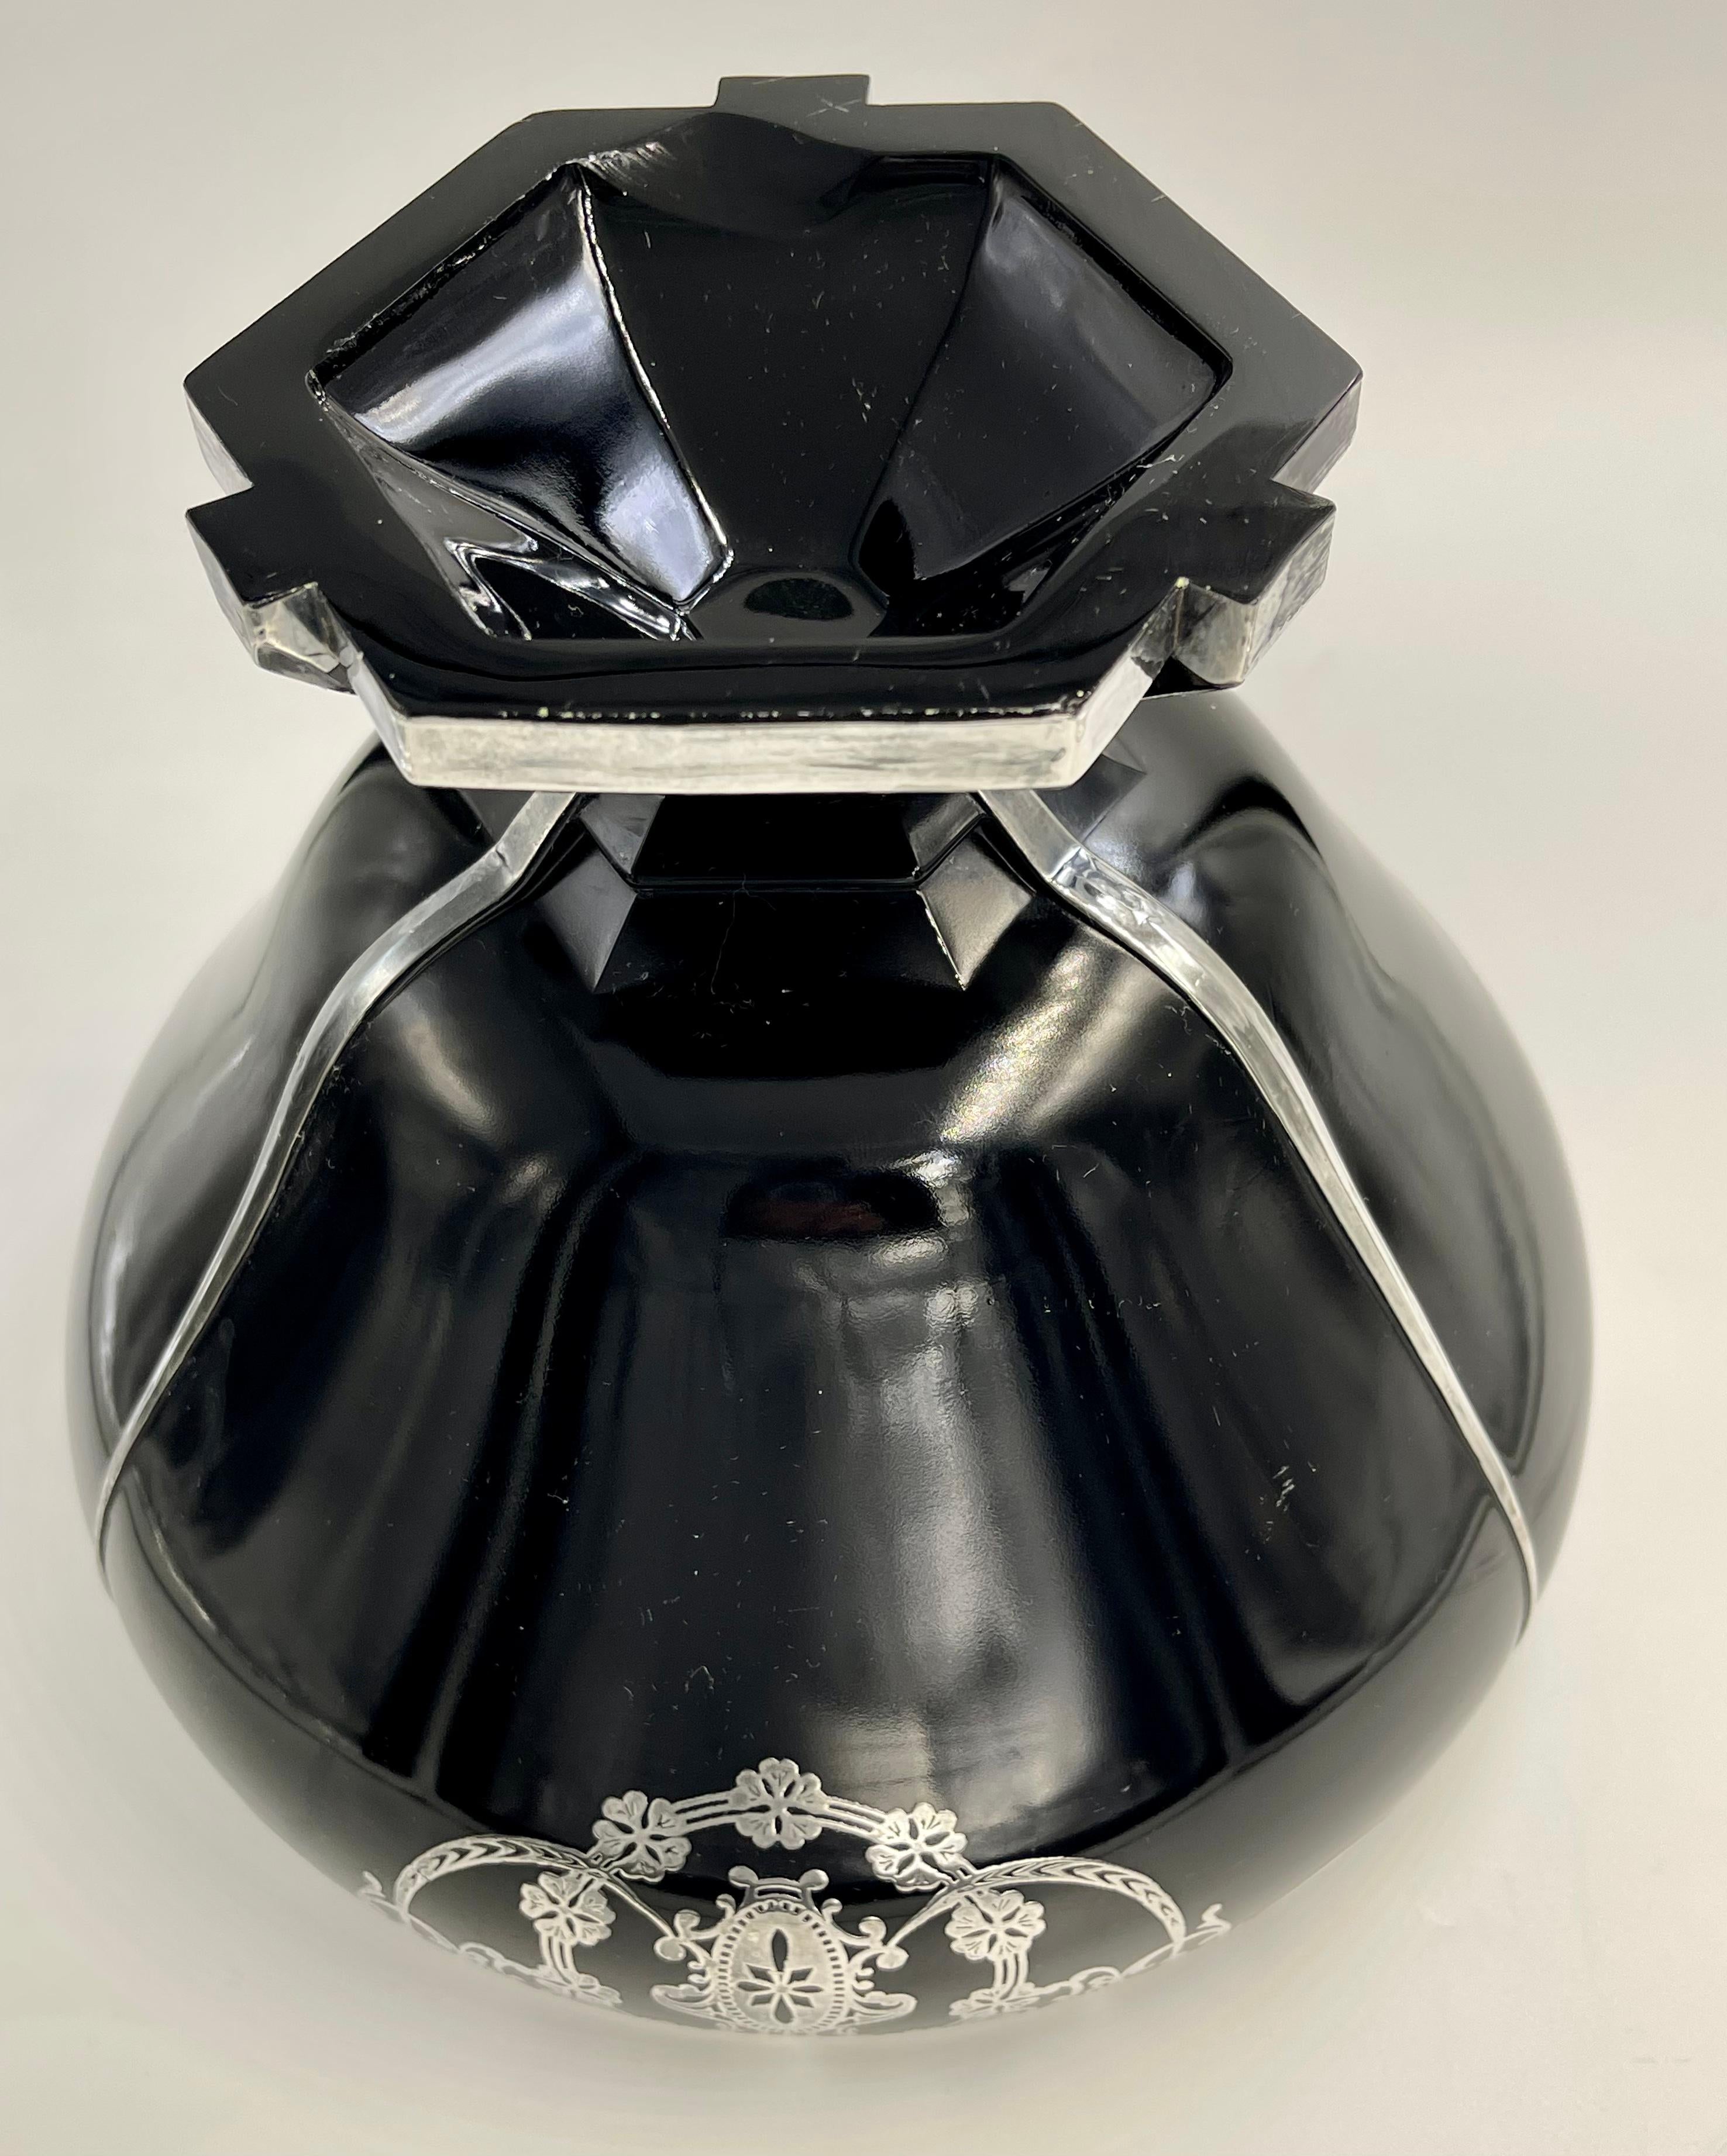 Impressive Art Deco black amethyst glass with a flower, vine, scroll and cartouche design in three areas going around the bowl near the top. The top has a sterling rim as does the bottom. There are also three sterling lines that run from the top to